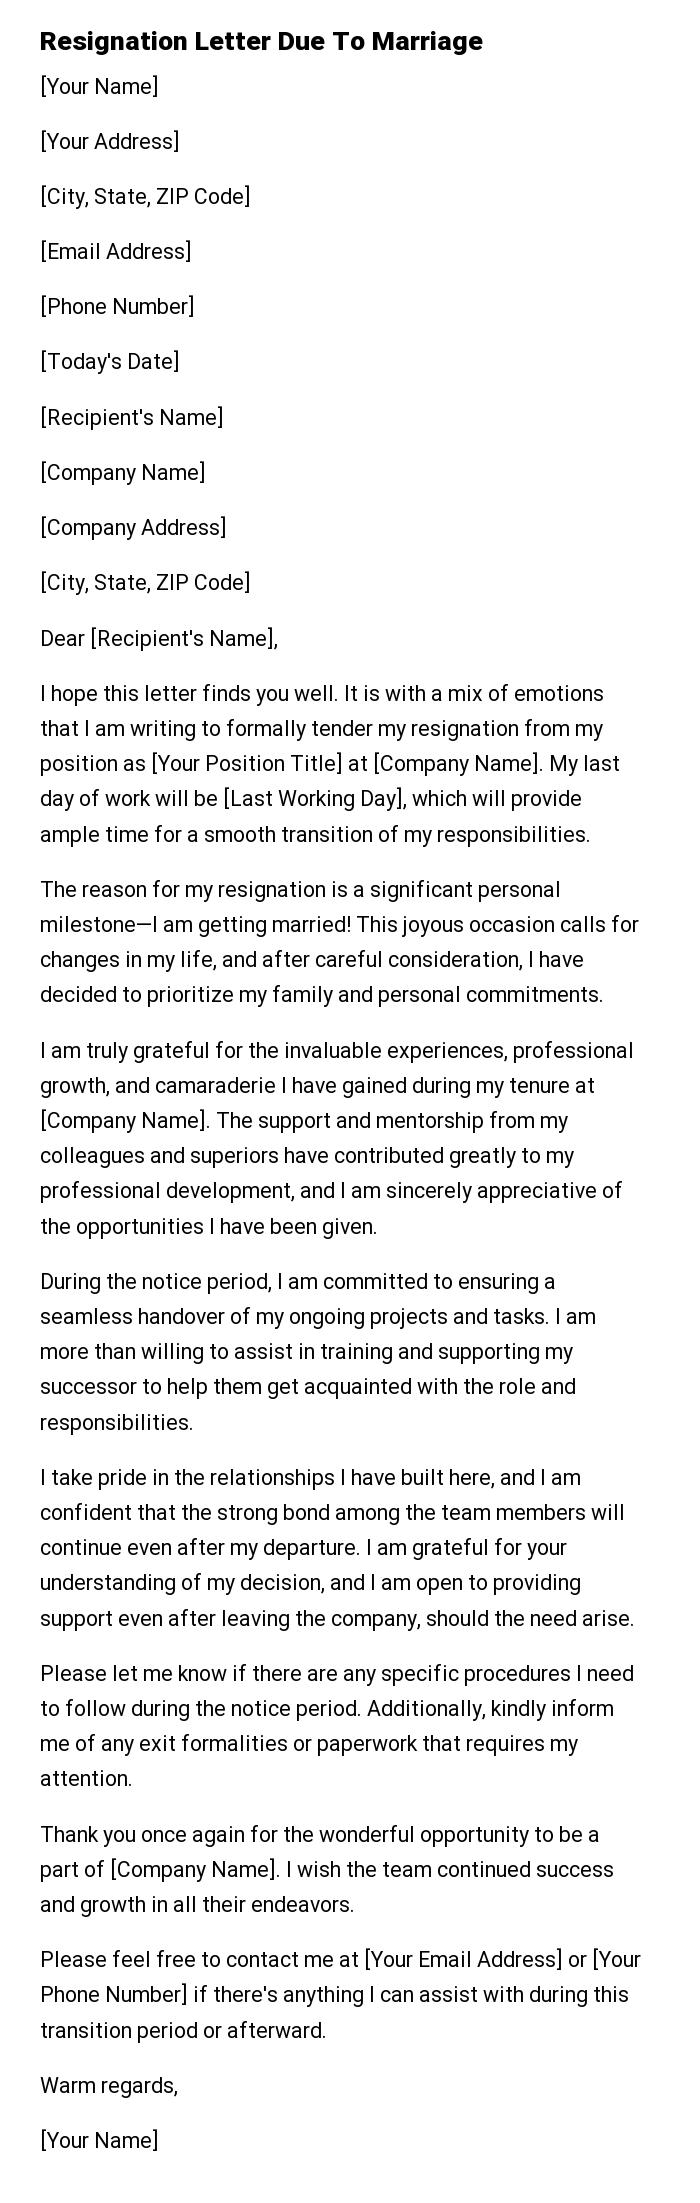 Resignation Letter Due To Marriage